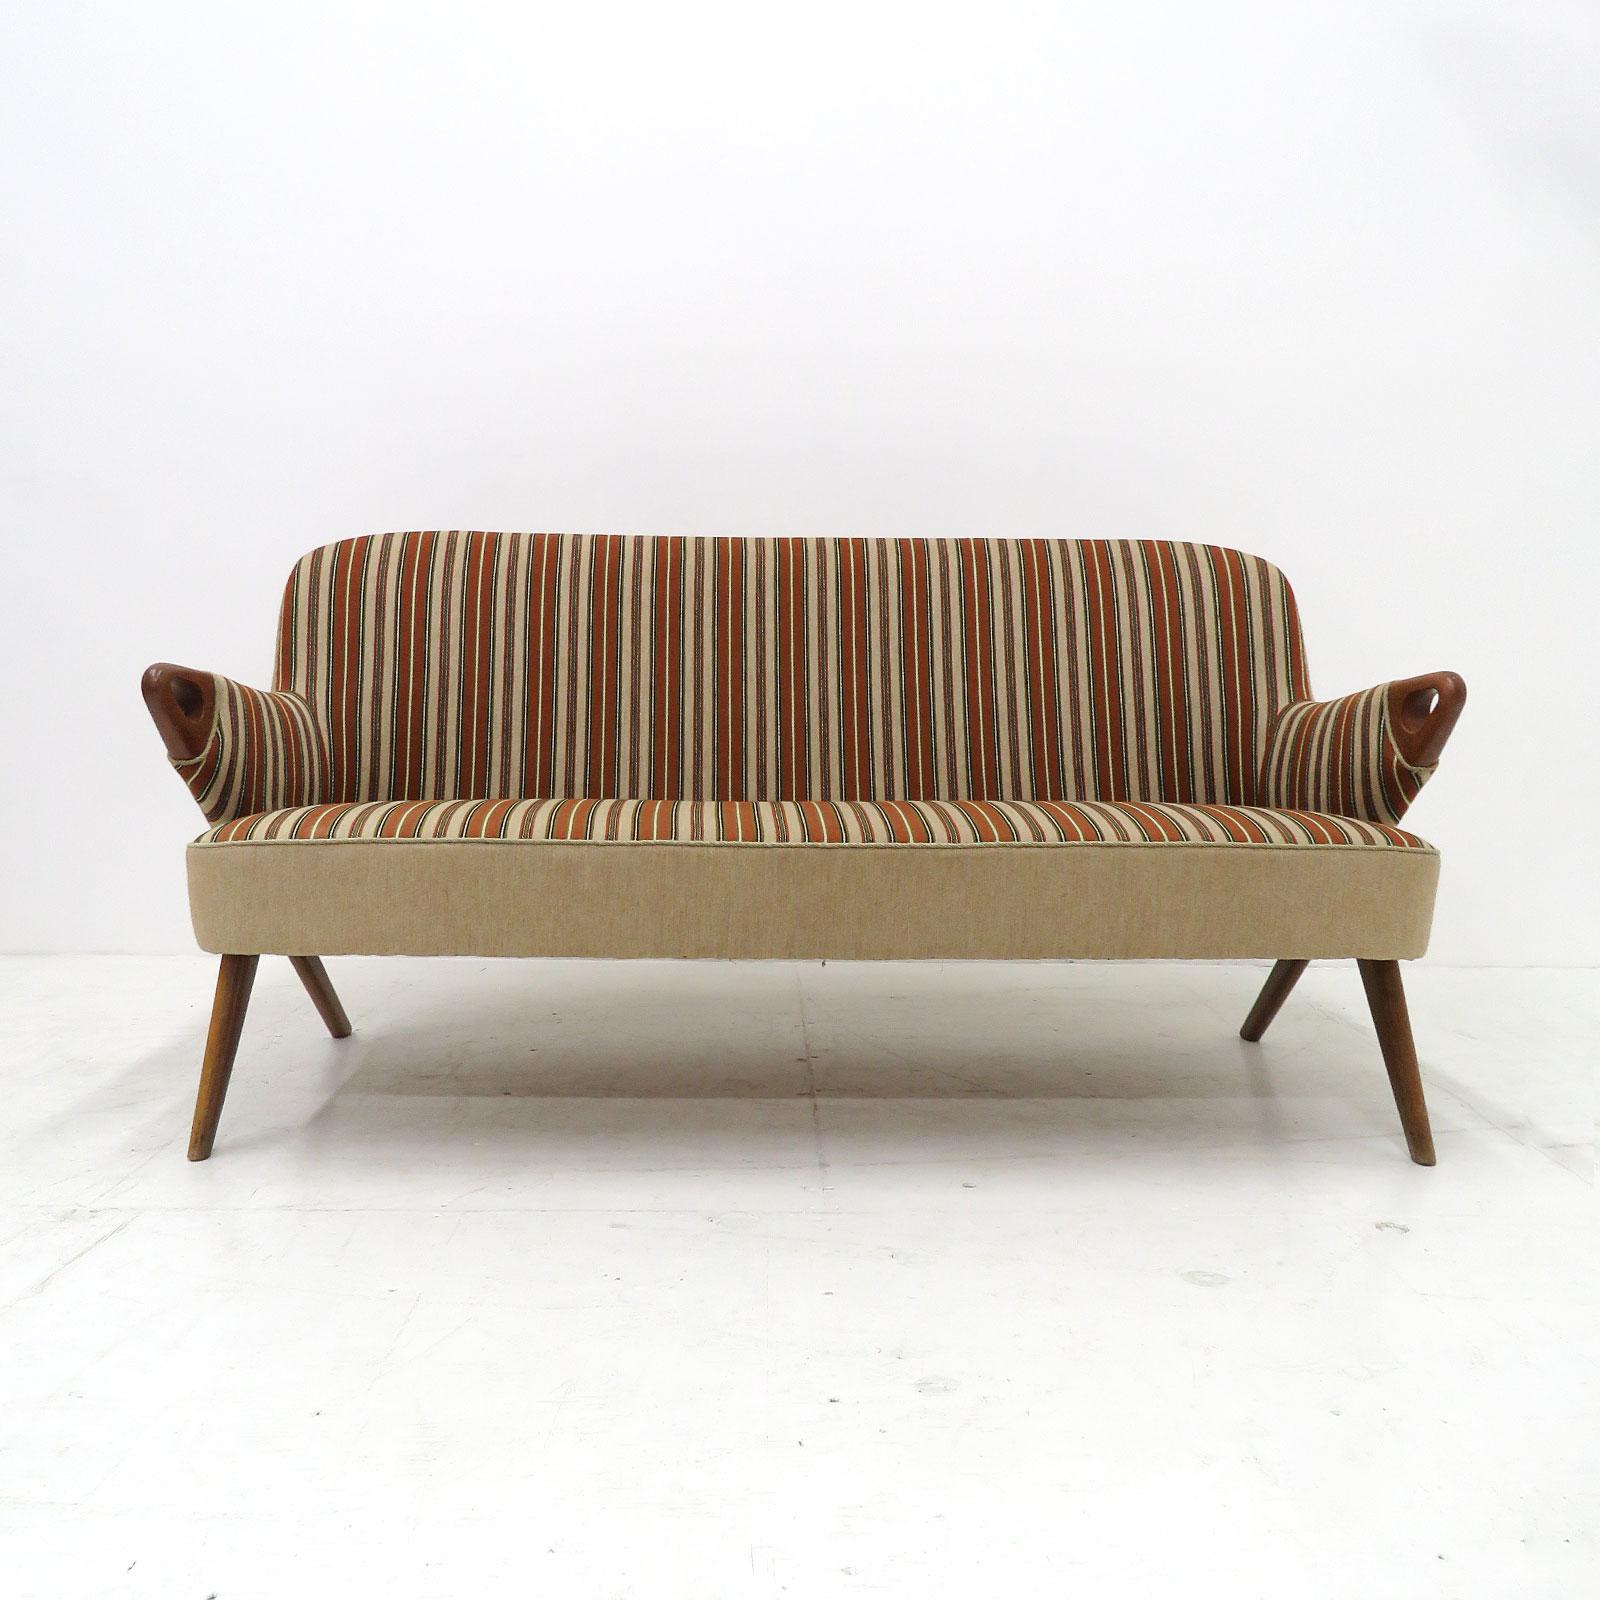 Wonderful Danish Modern sofa attributed to Svend Skipper, 1950, with earthy multicolor striped upholstery on teak legs and with sculptural teak hand rests.